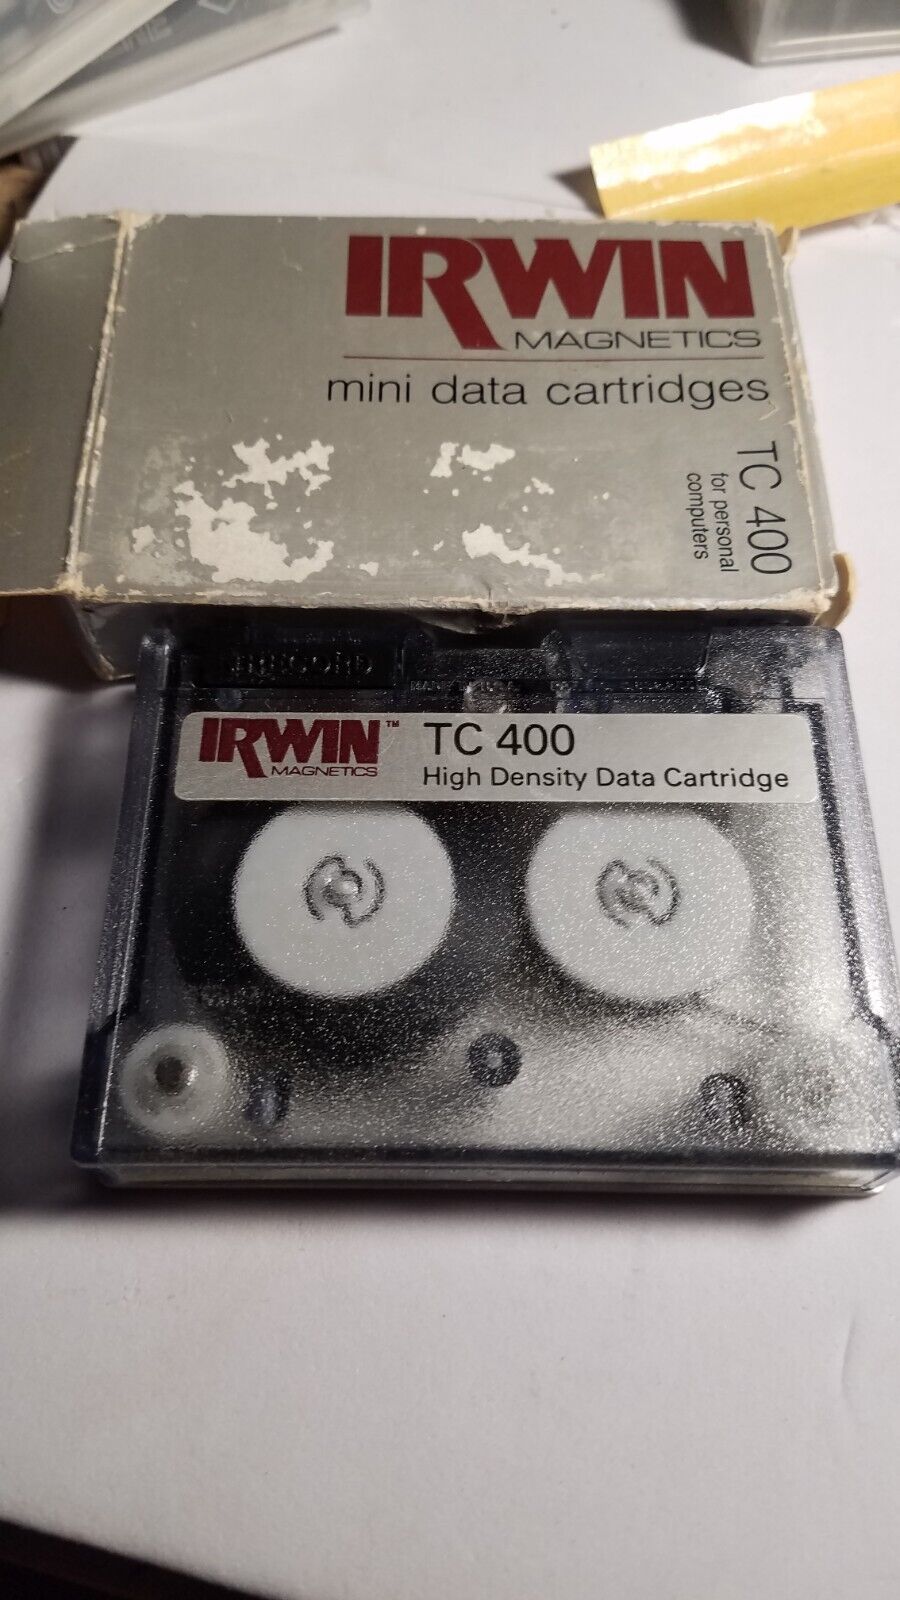 Vintage 1 Irwin TC 400  MAGNETUC Data Cartridges 120  FOR PERSONAL COMPUTERS